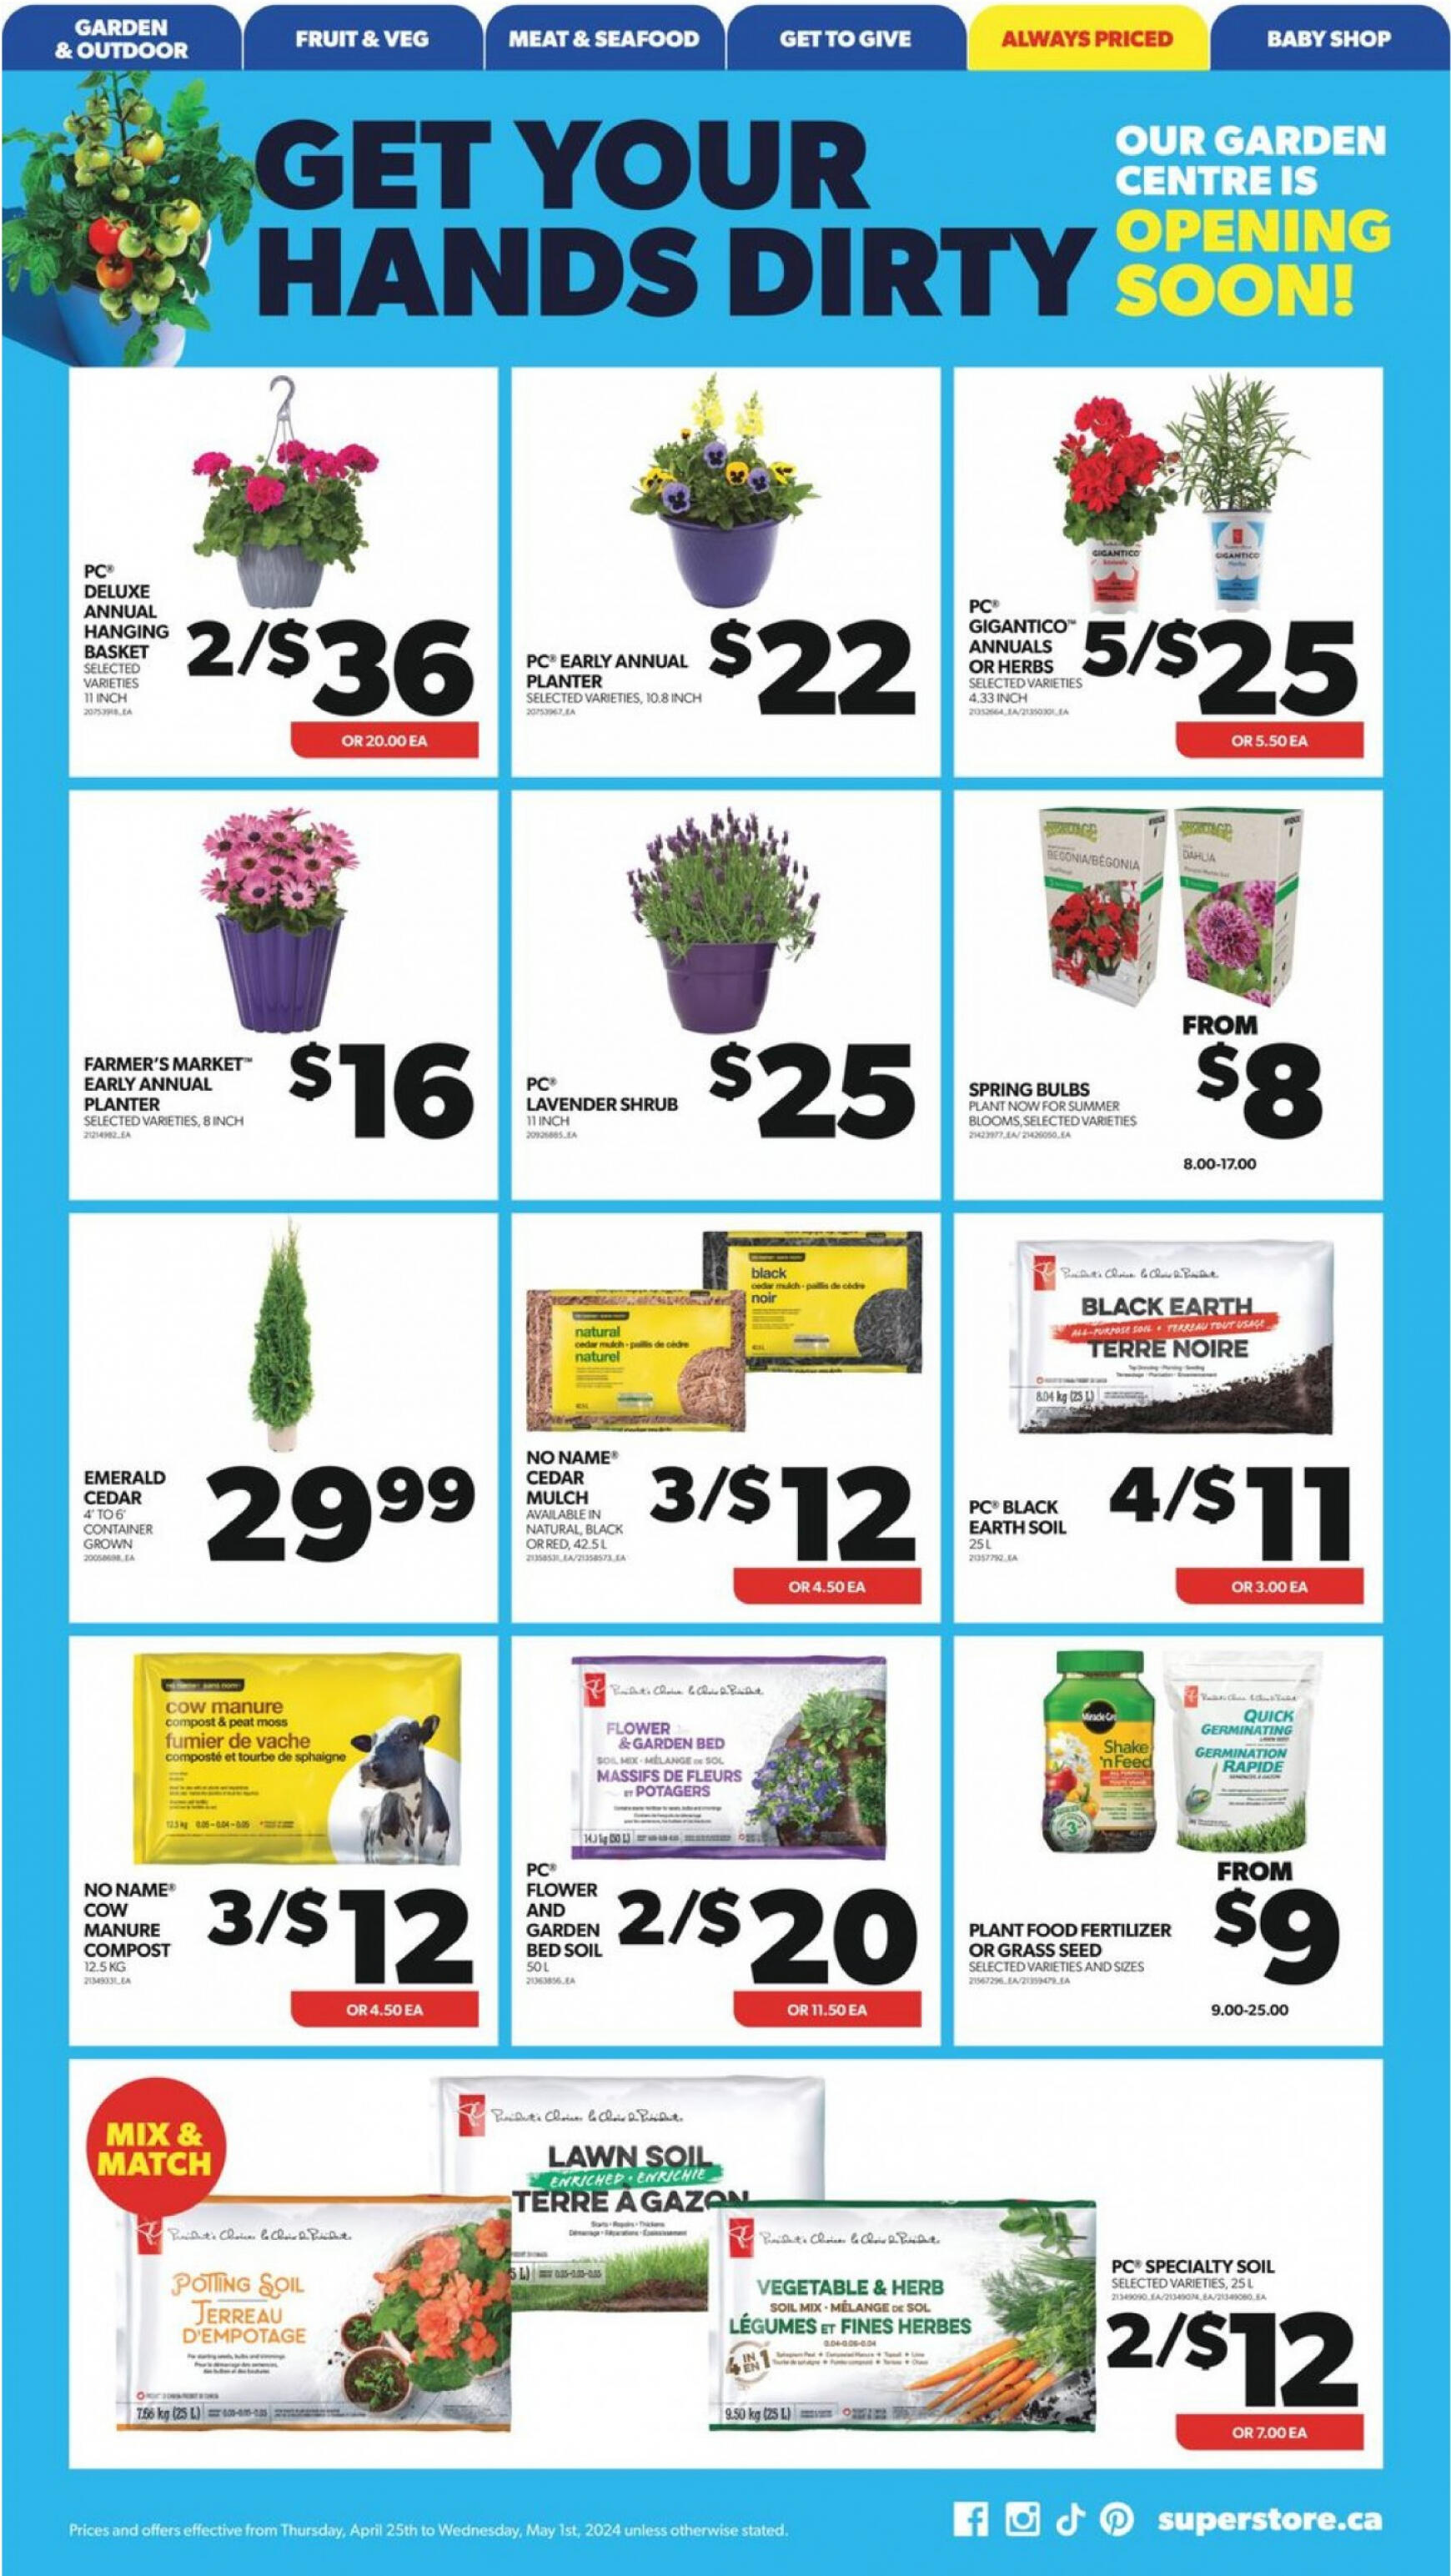 real-canadian-superstore - Real Canadian Superstore flyer current 01.05. - 31.05. - page: 6